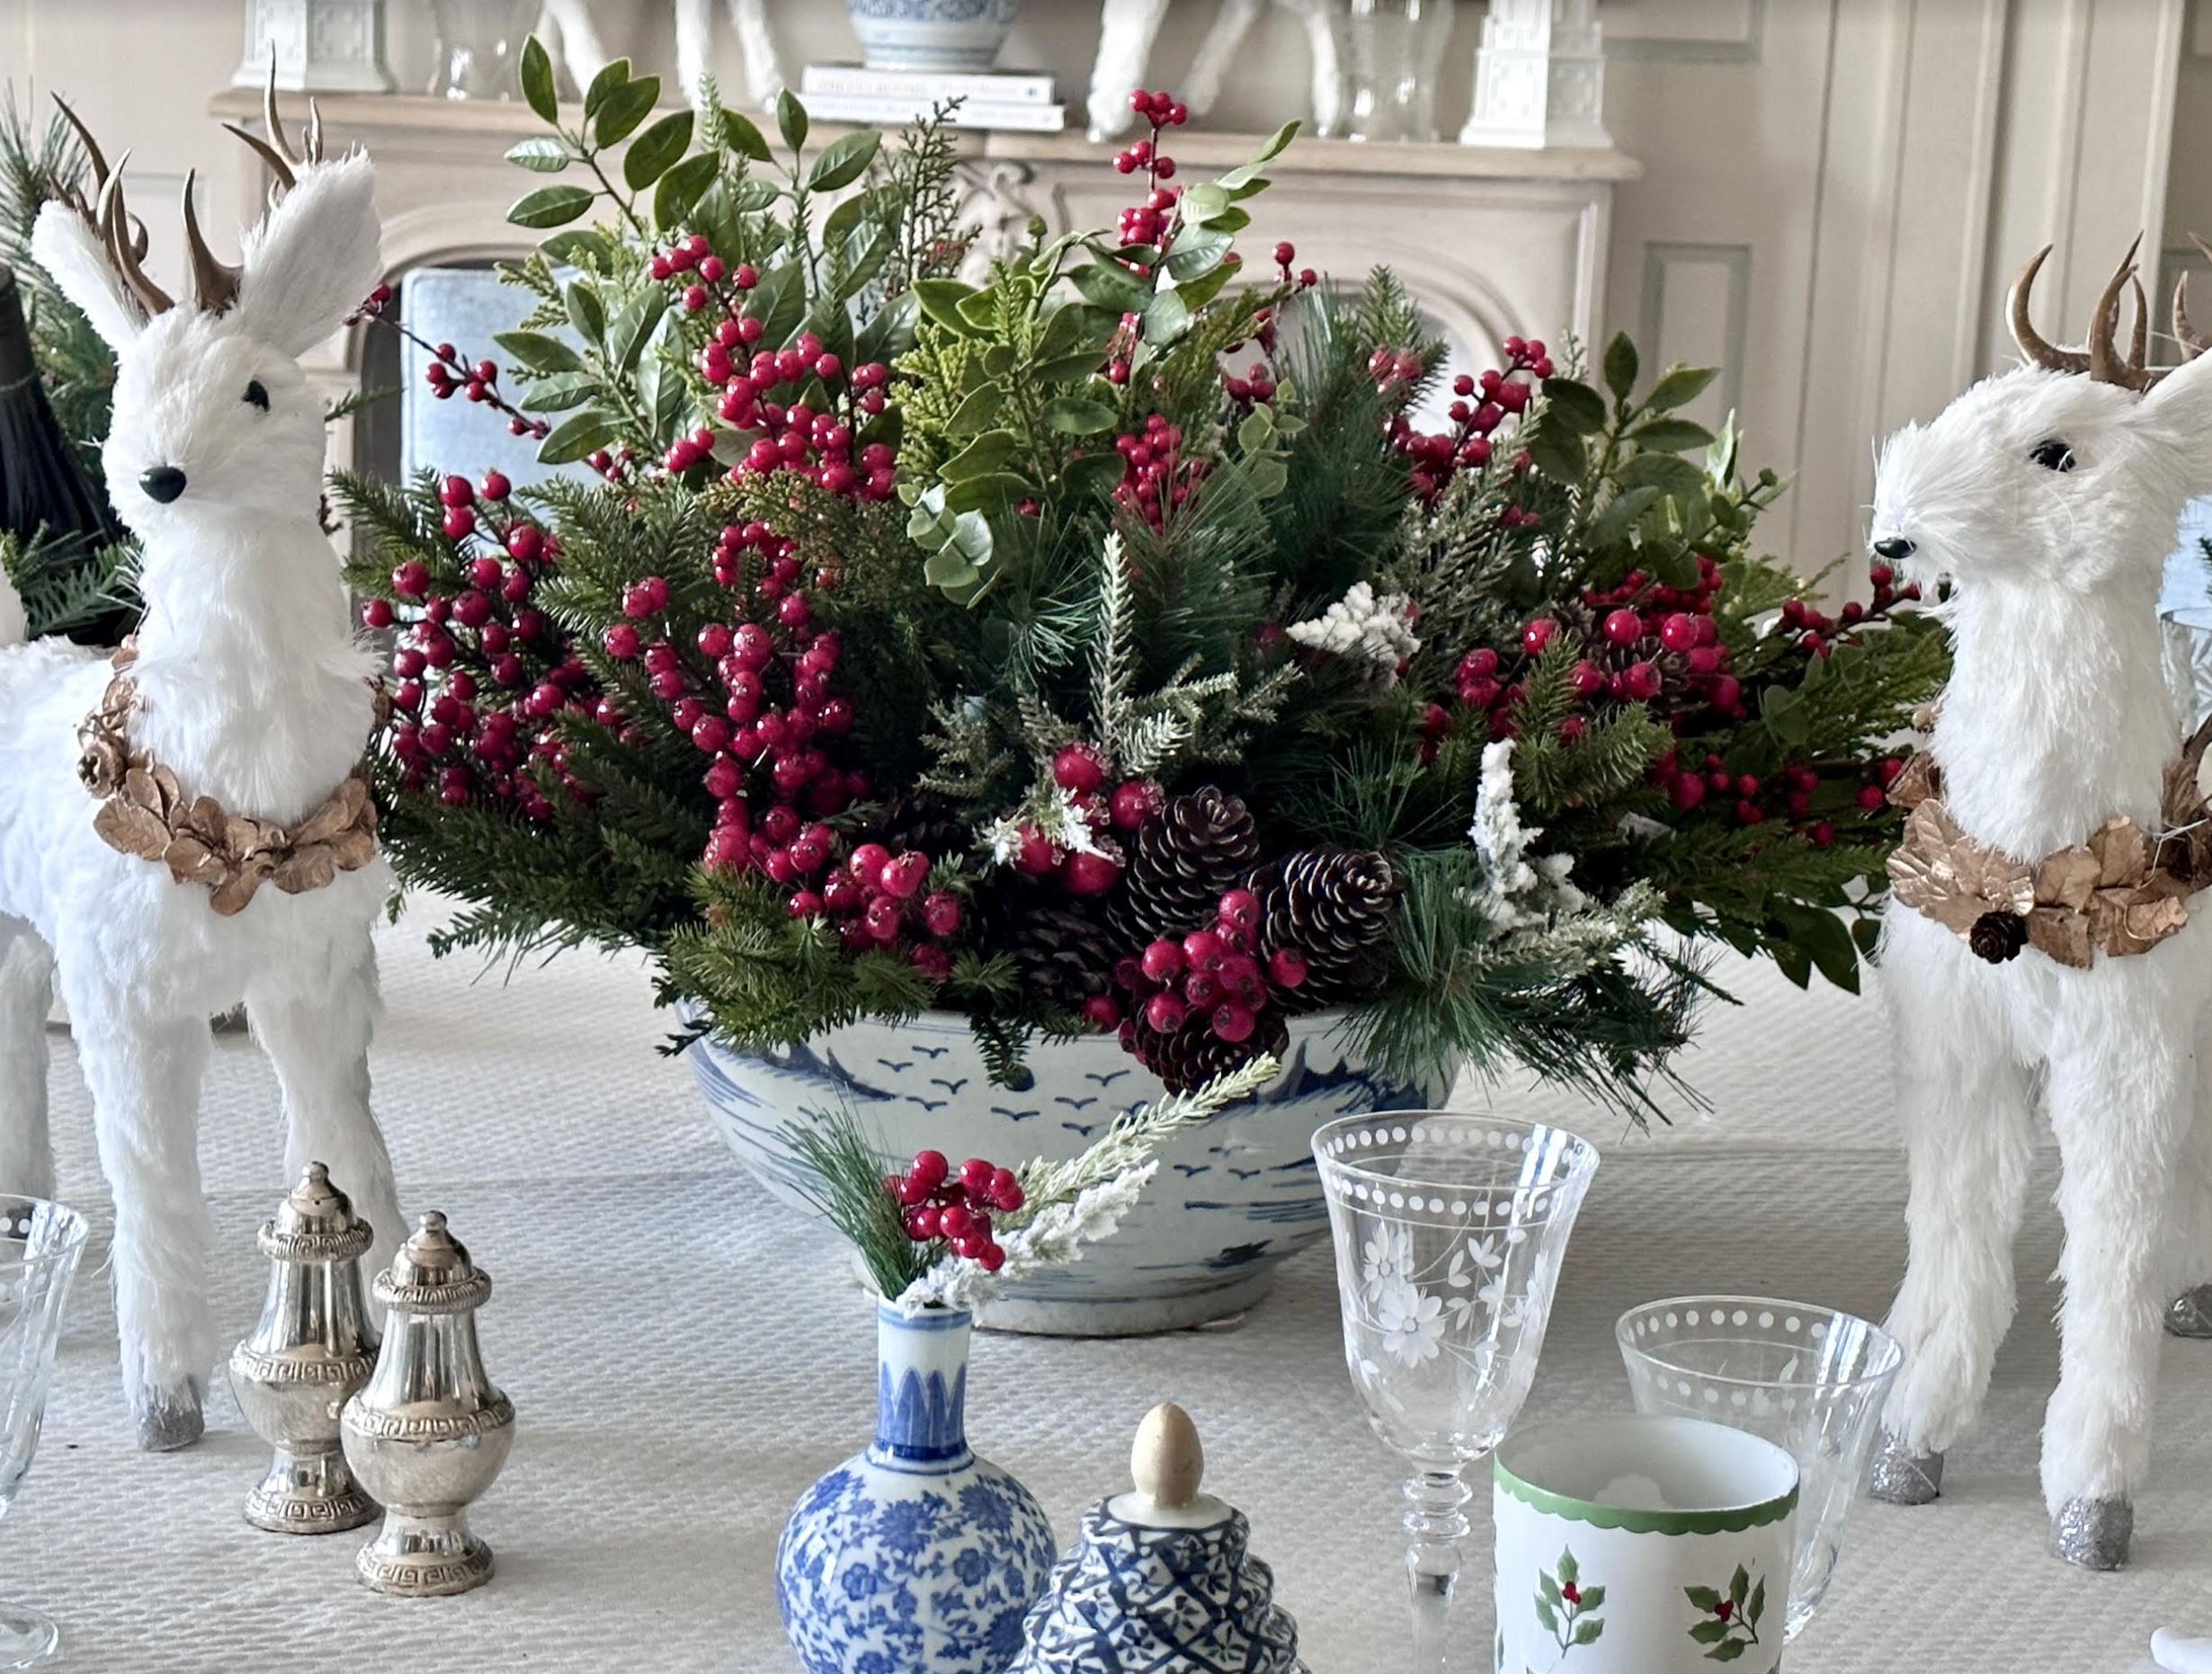 Decking the halls in the dining room….blue and white with a touch of red!